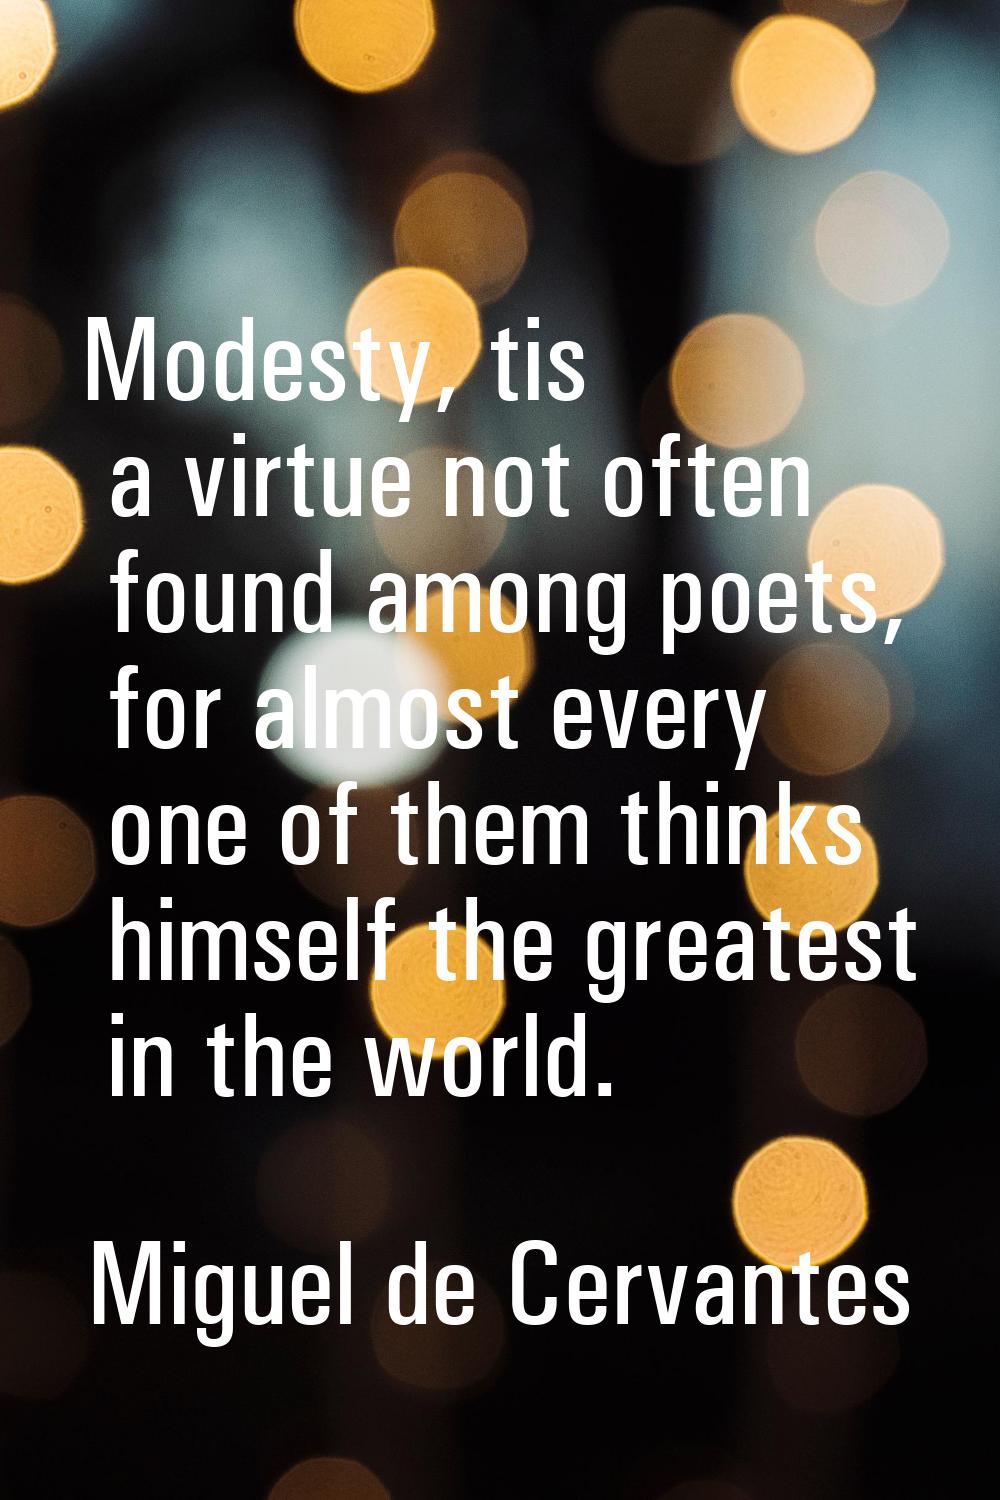 Modesty, tis a virtue not often found among poets, for almost every one of them thinks himself the 